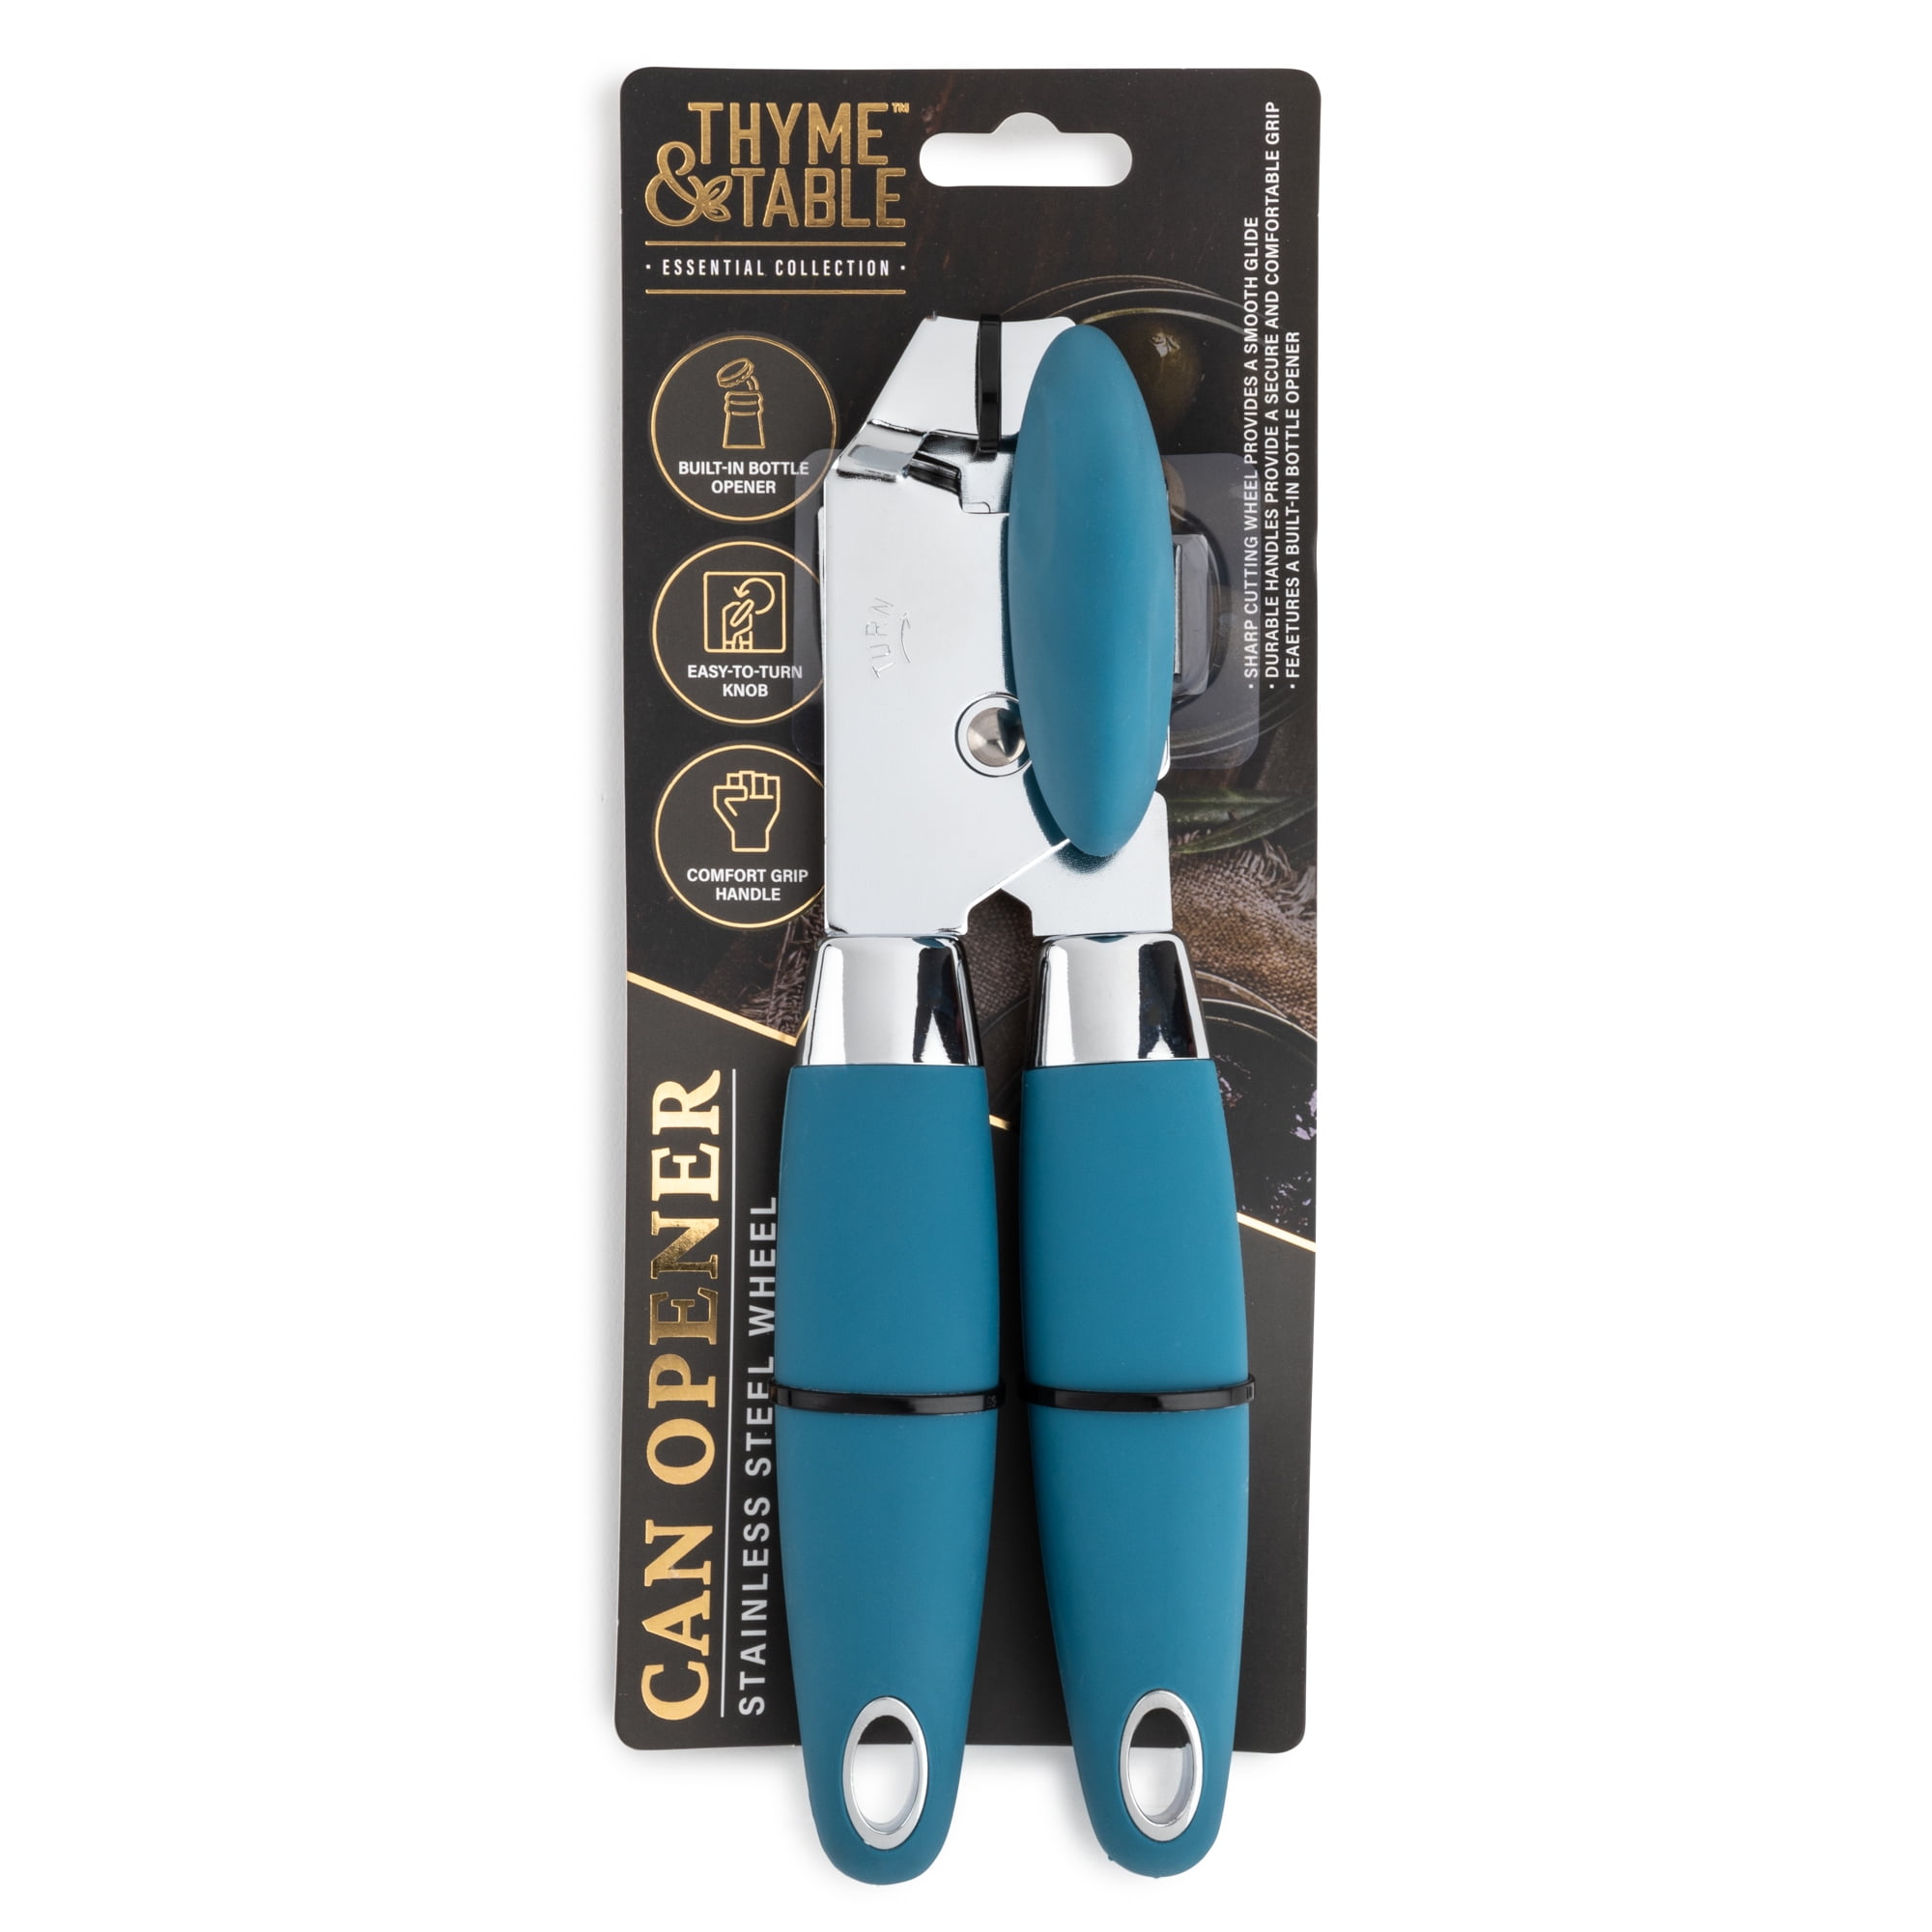 Comfy Grip Midnight Blue Stainless Steel Can Opener - 7 3/4 x 2 x 2 1/4  - 1 count box